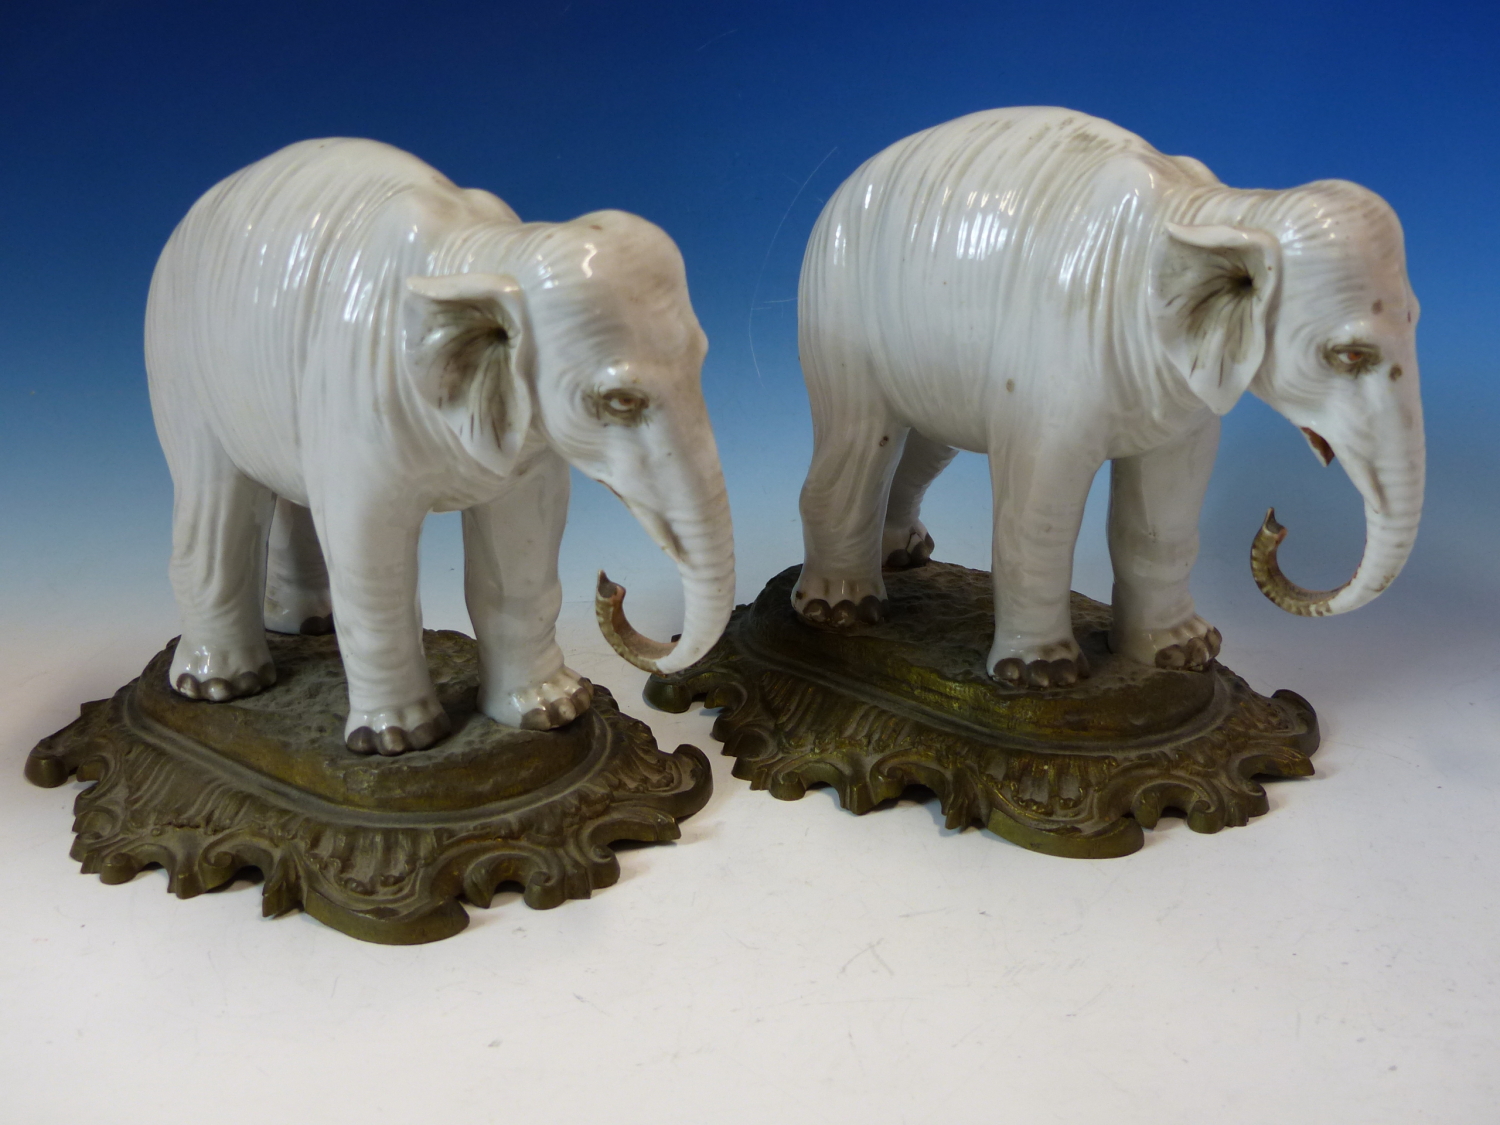 A PAIR OF ANTIQUE GERMAN PORCELAIN ELEPHANTS STANDING ON LATER ORMOLU BASES. W 26cms. - Image 4 of 8